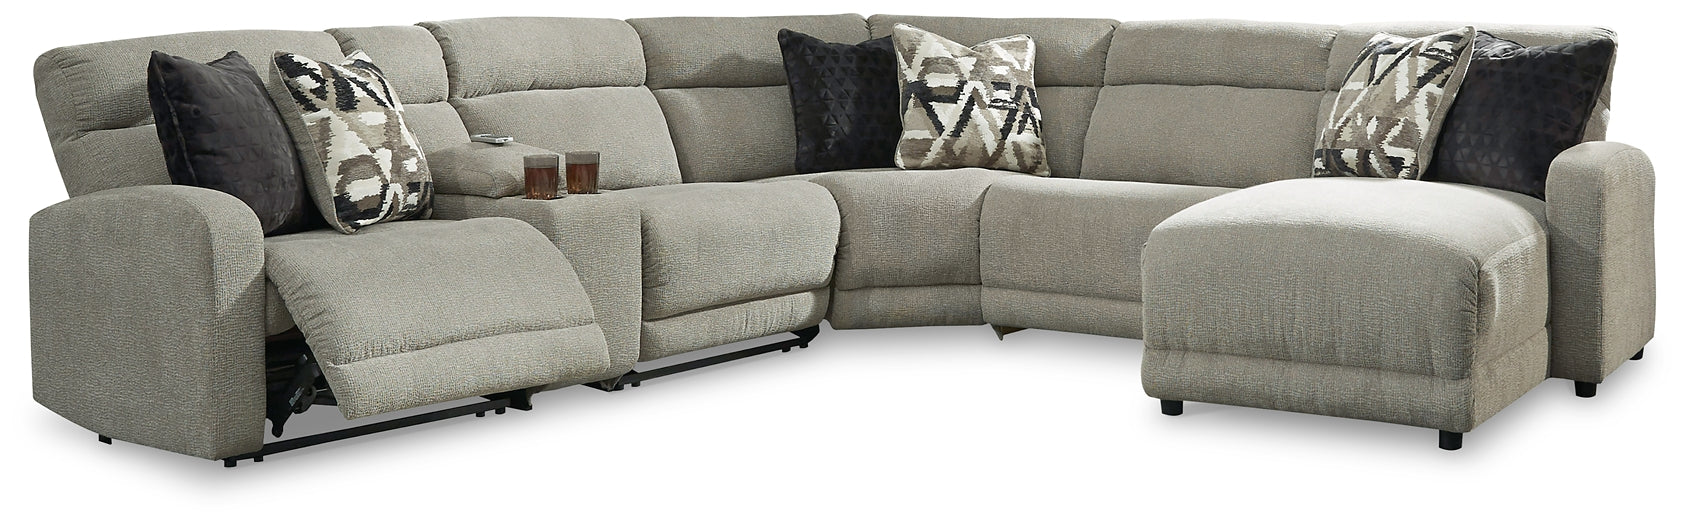 Colleyville 6-Piece Power Reclining Sectional with Chaise JB's Furniture  Home Furniture, Home Decor, Furniture Store